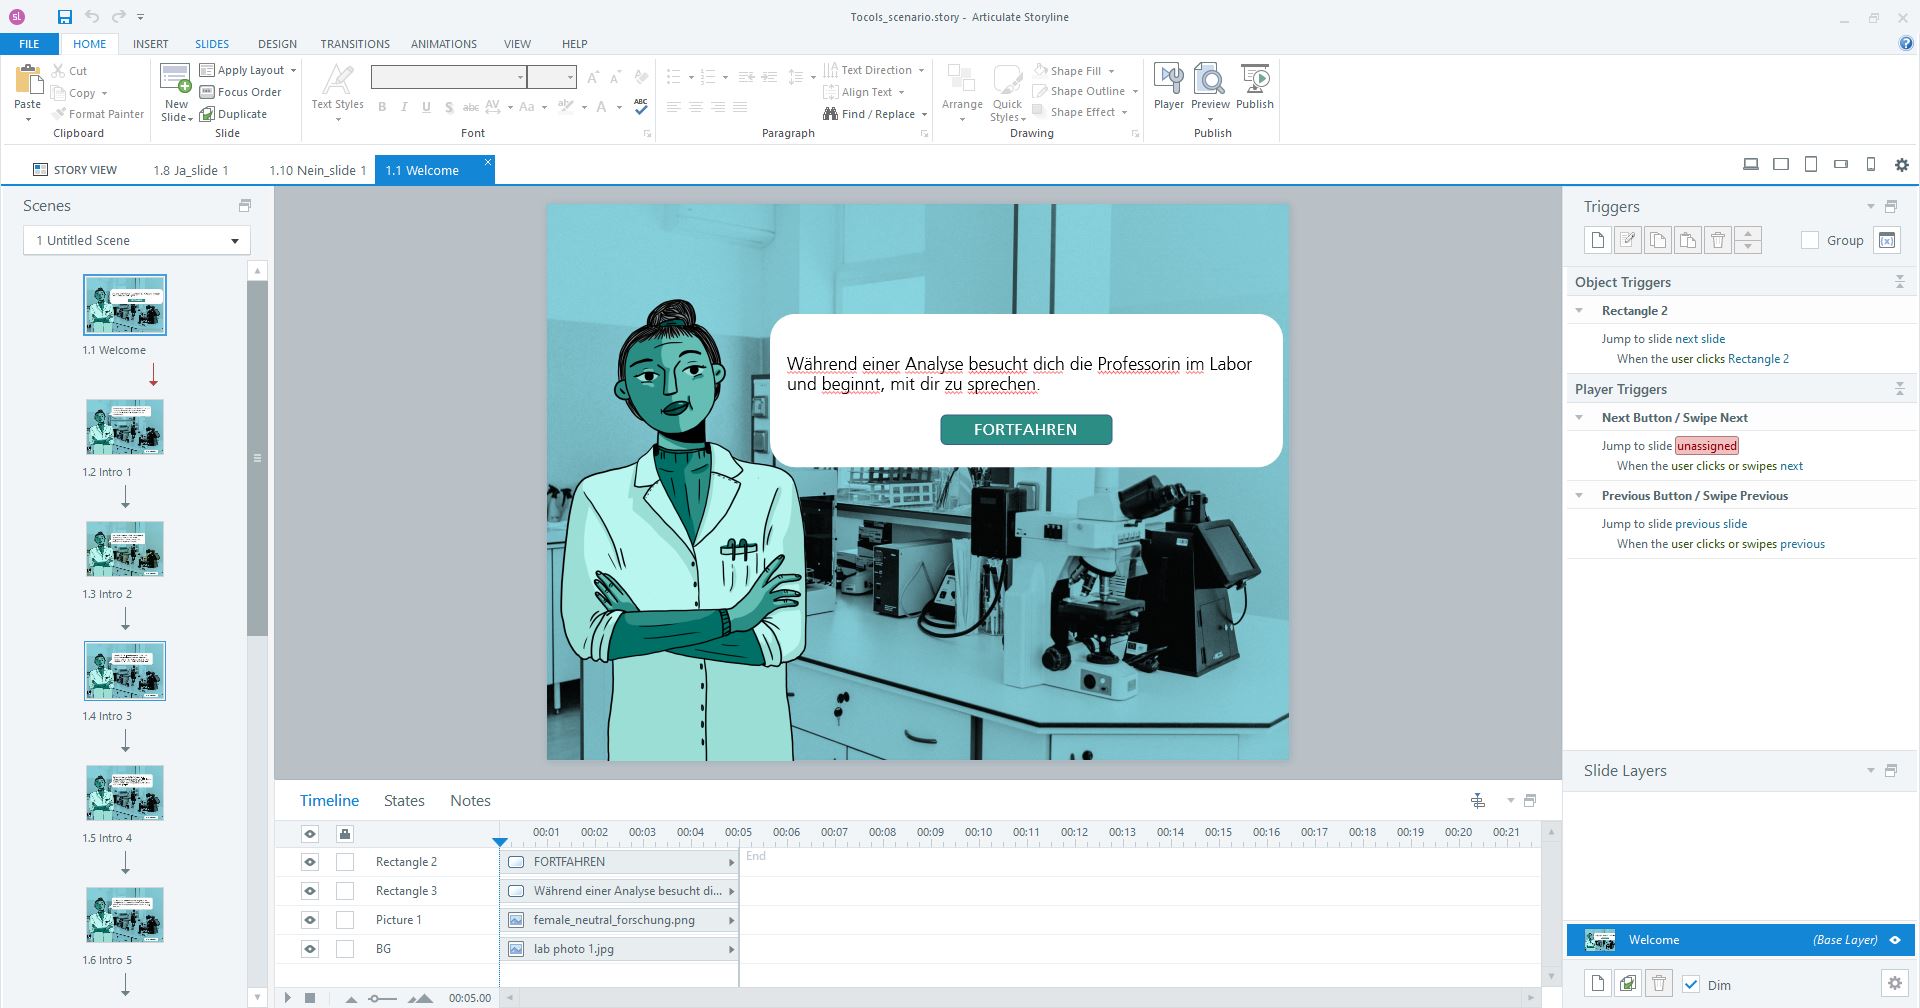 Implementation of the interactive illustration in the LMS Software Articulate